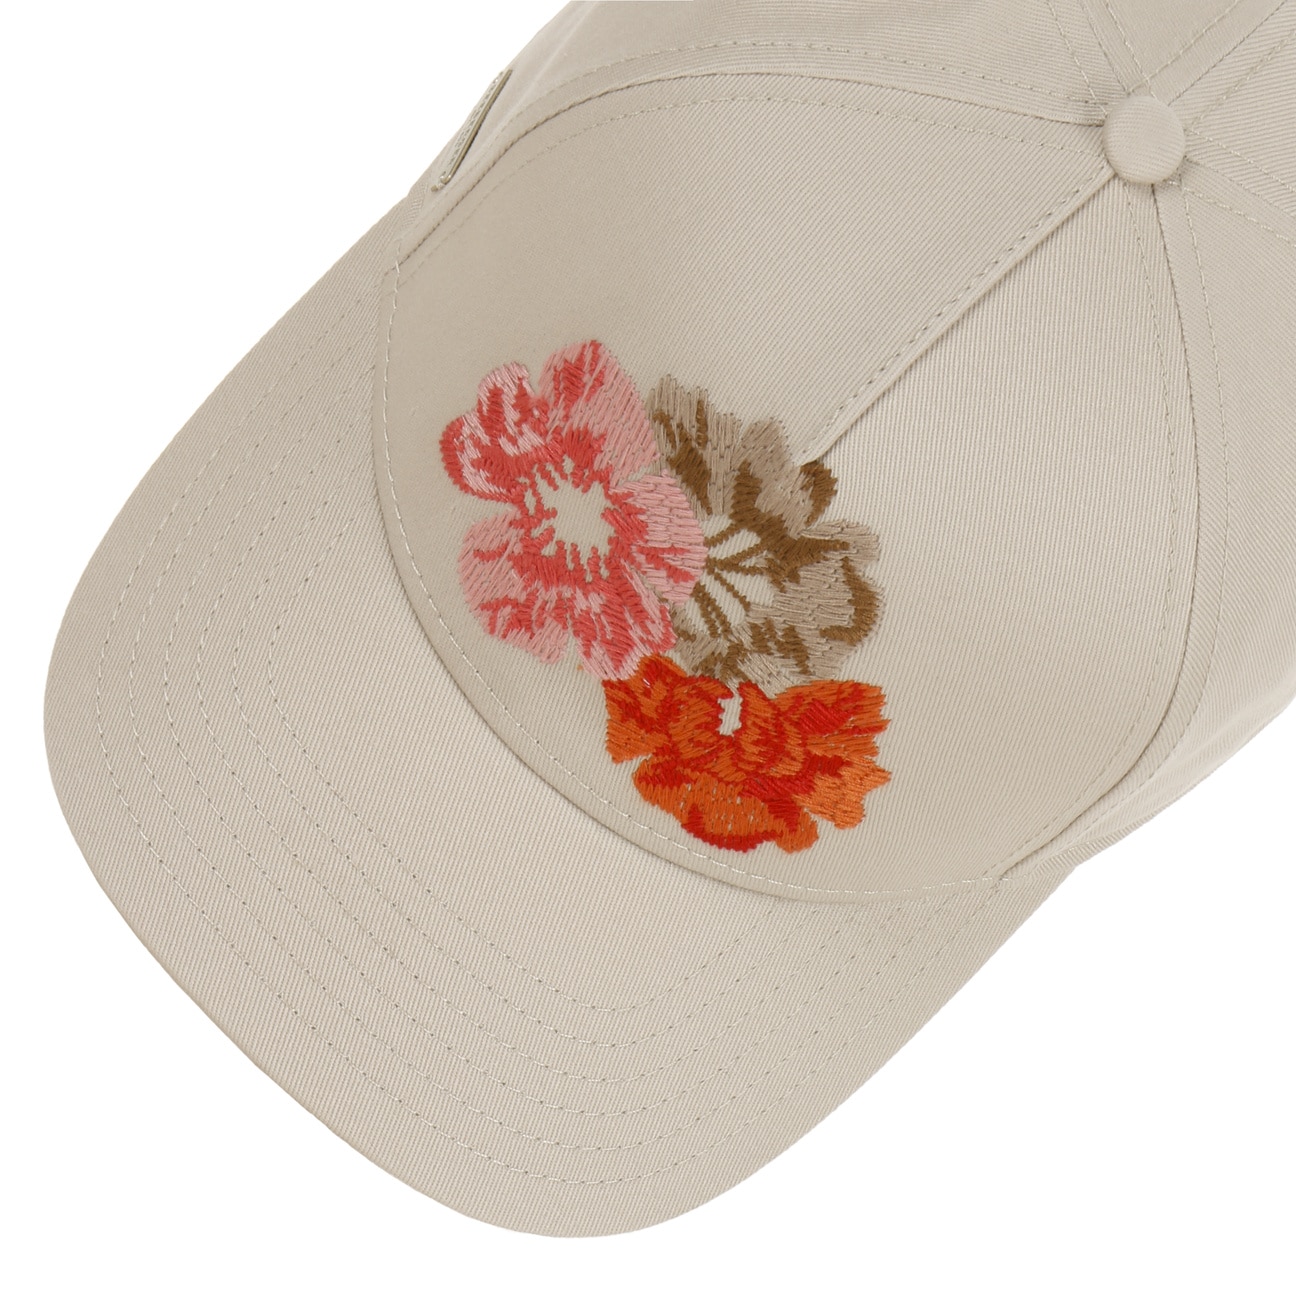 Flowers by - Stitched Seeberger 29,95 Cap €